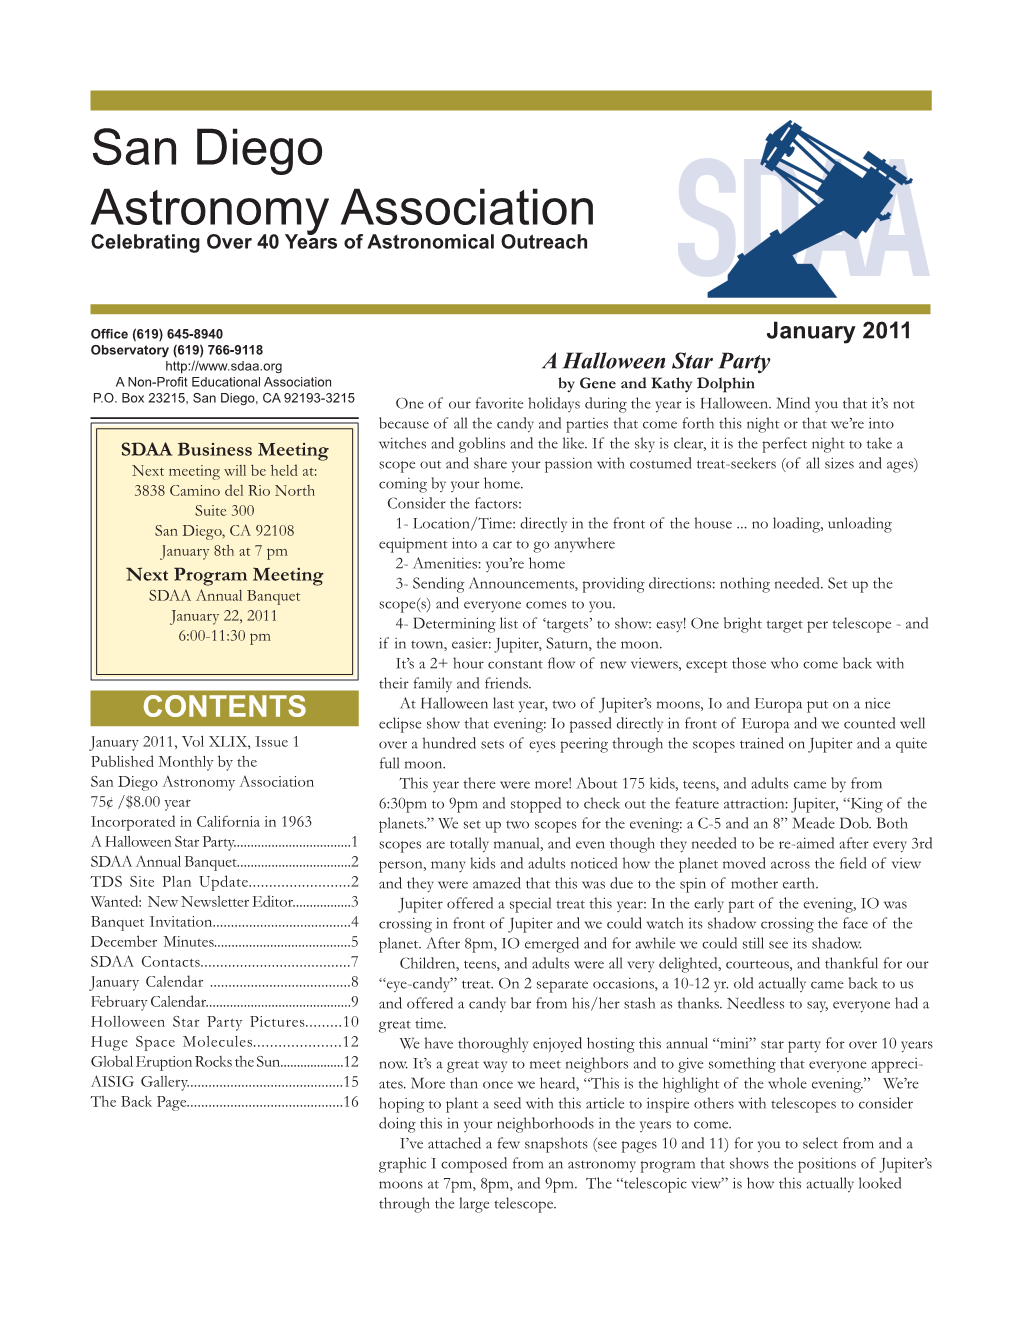 The San Diego Astronomy Association's Annual Banquet